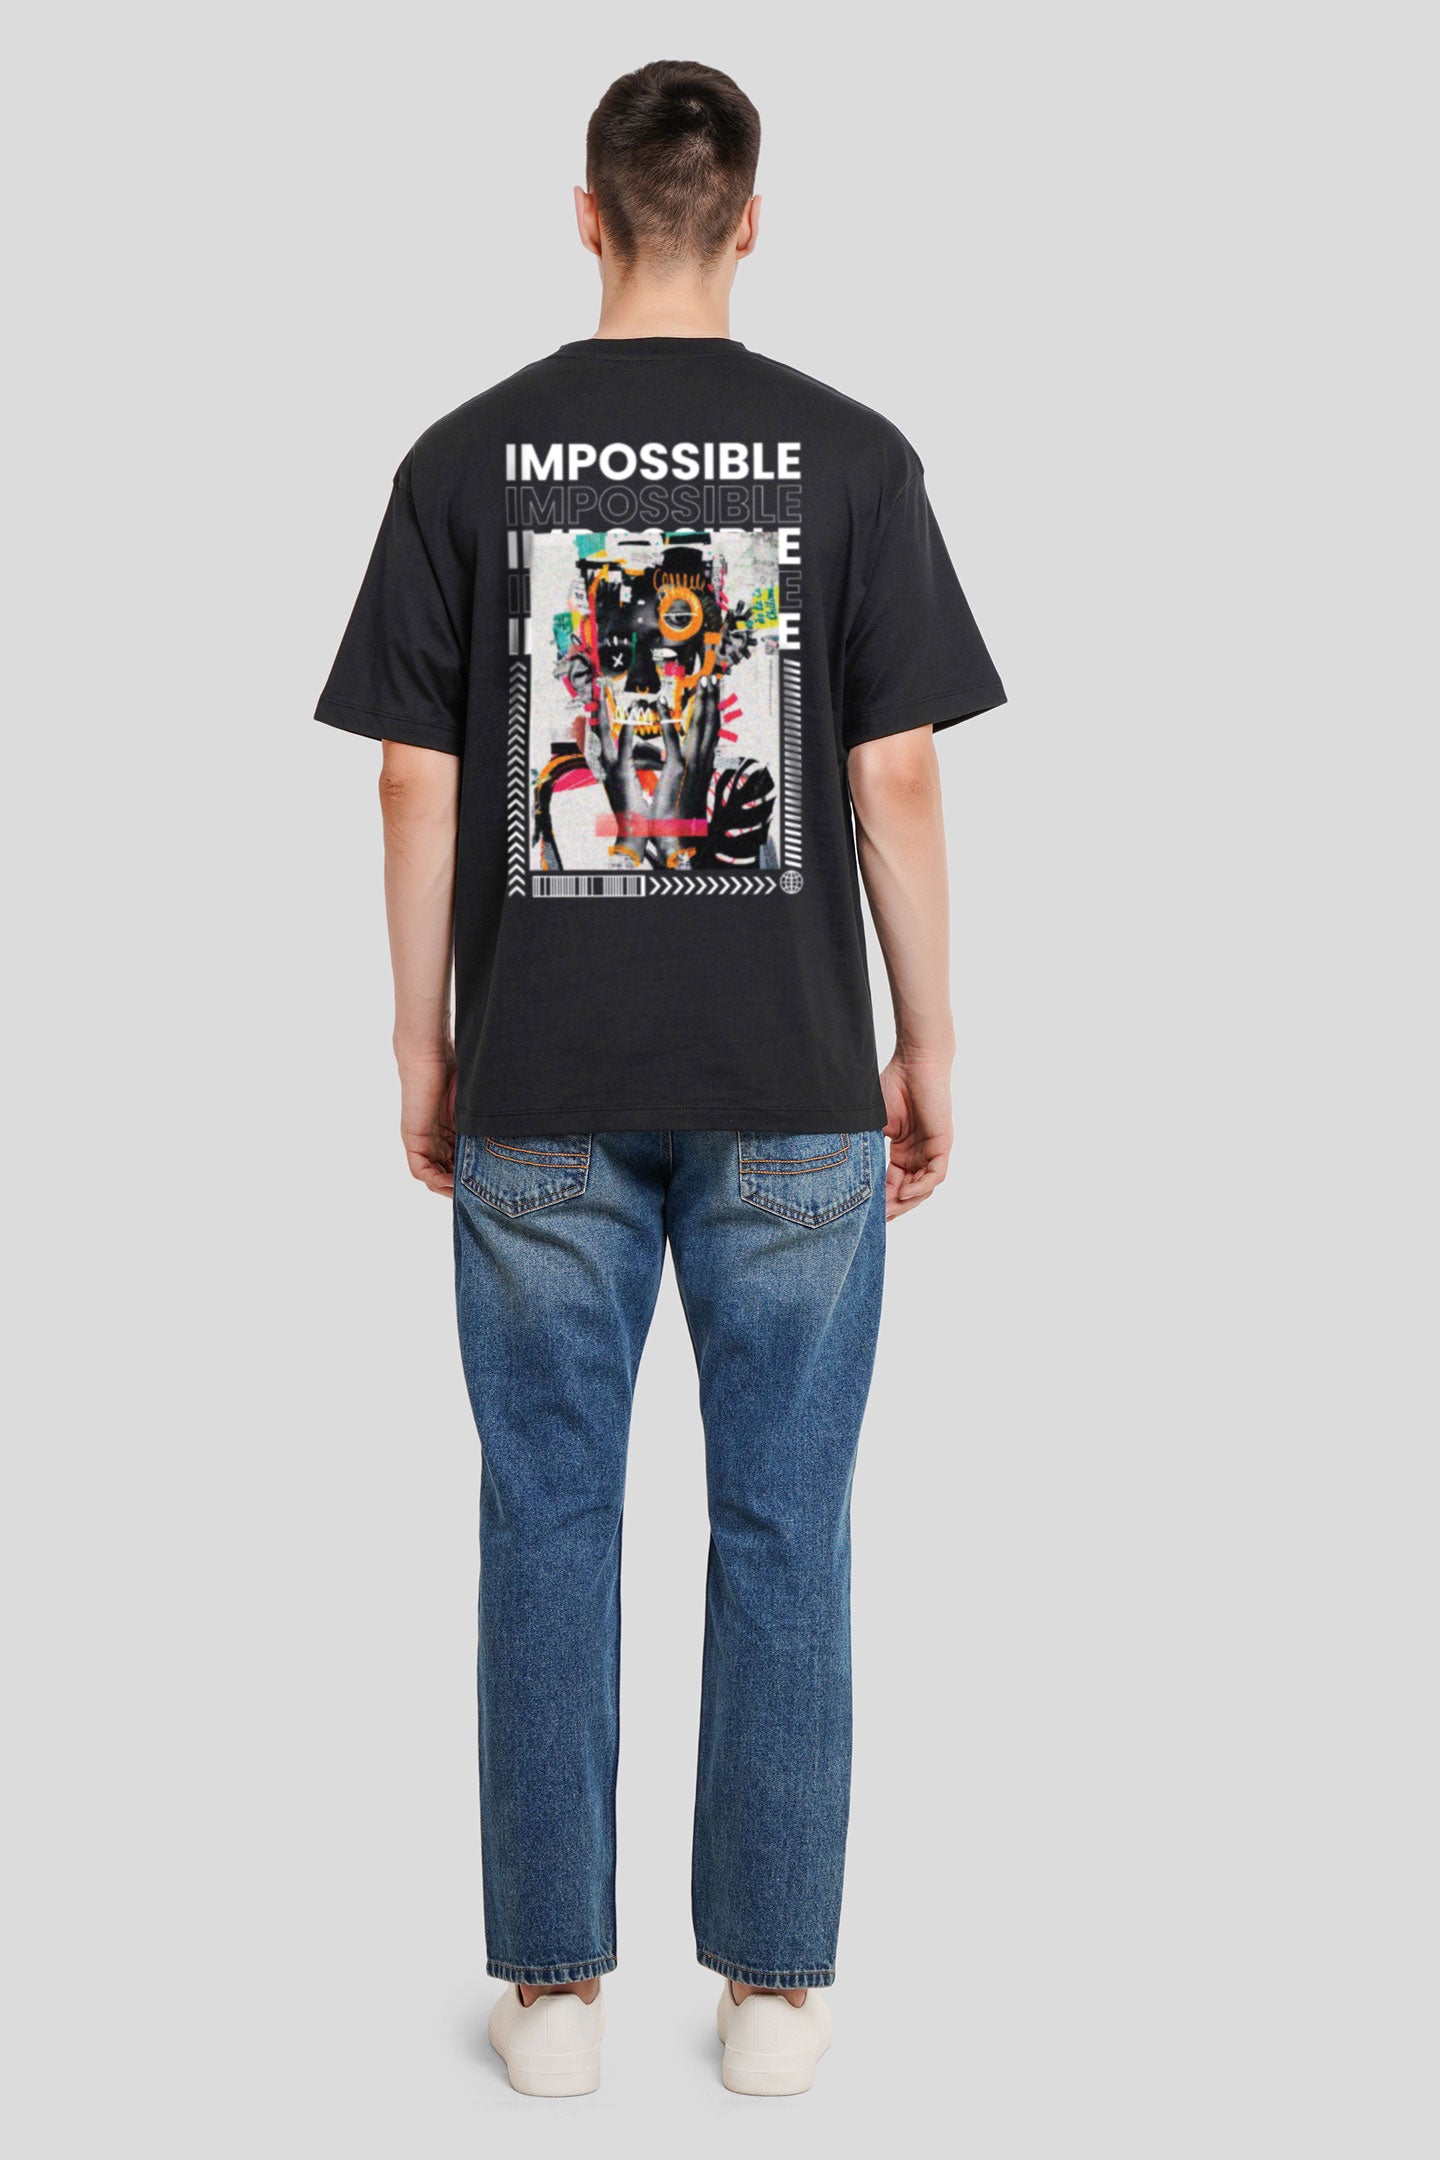 Impossible Black Printed T Shirt Men Oversized Fit With Front And Back Design Pic 5